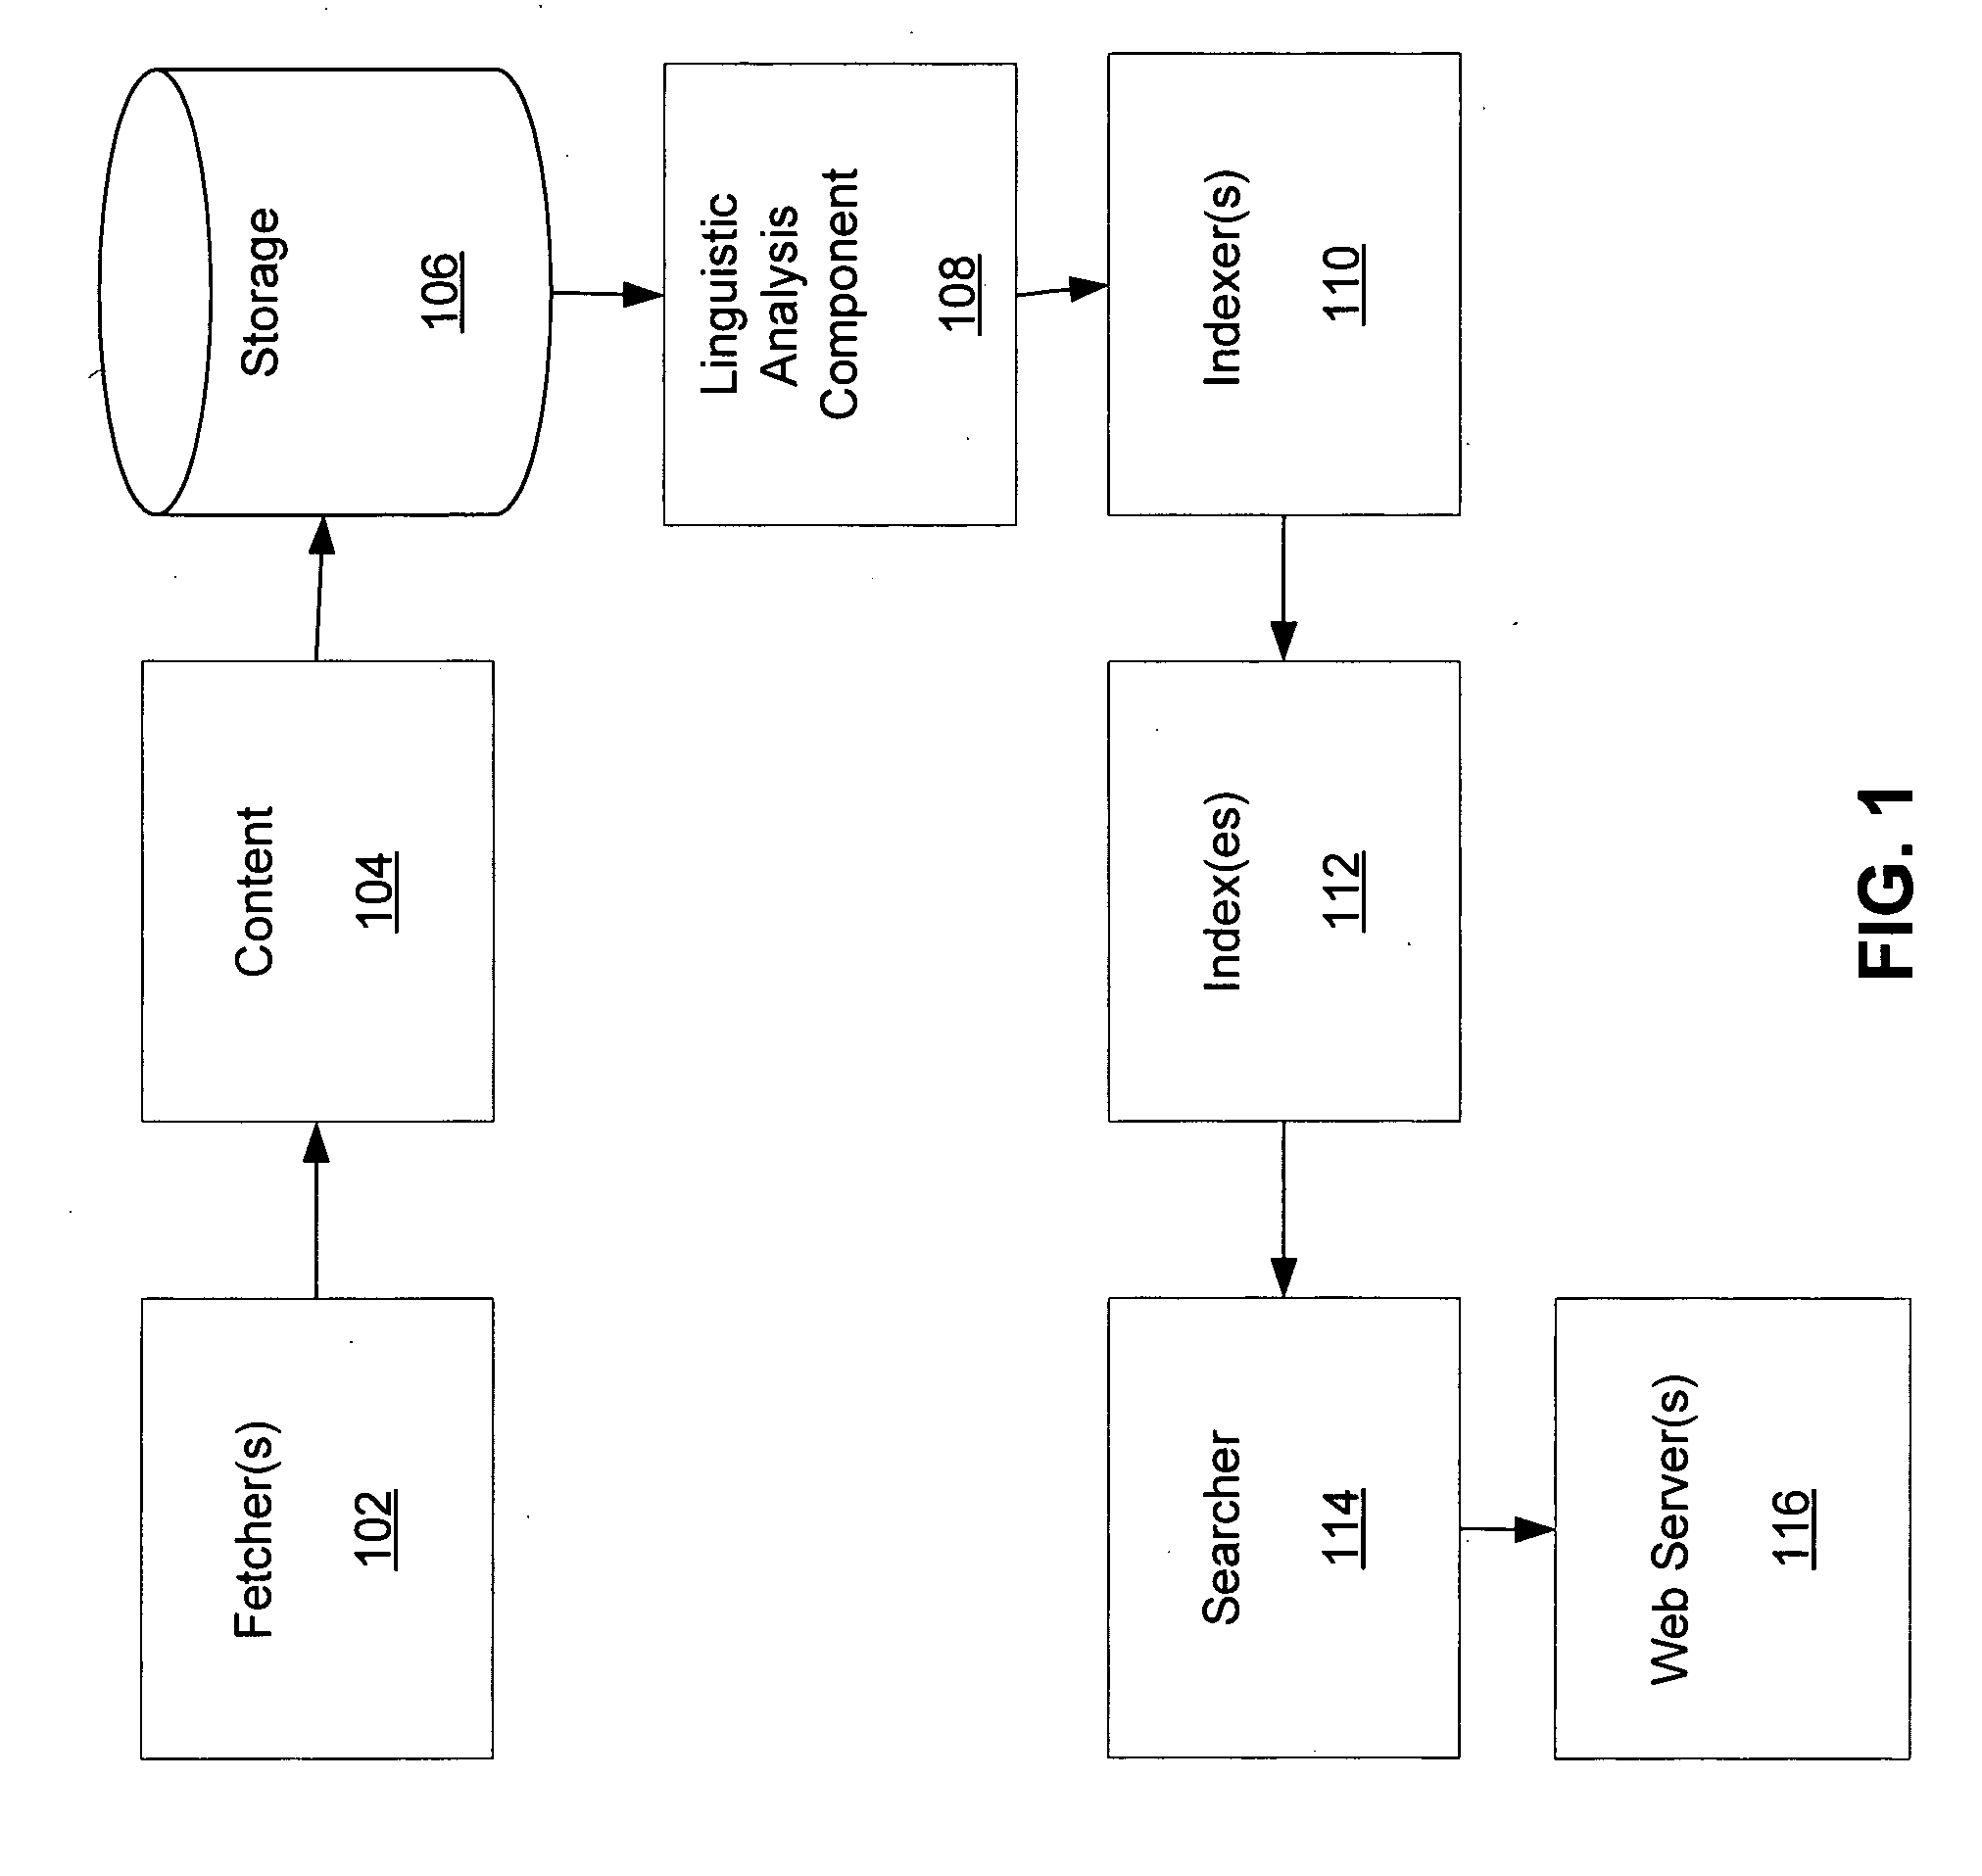 Systems and methods for providing search results based on linguistic analysis